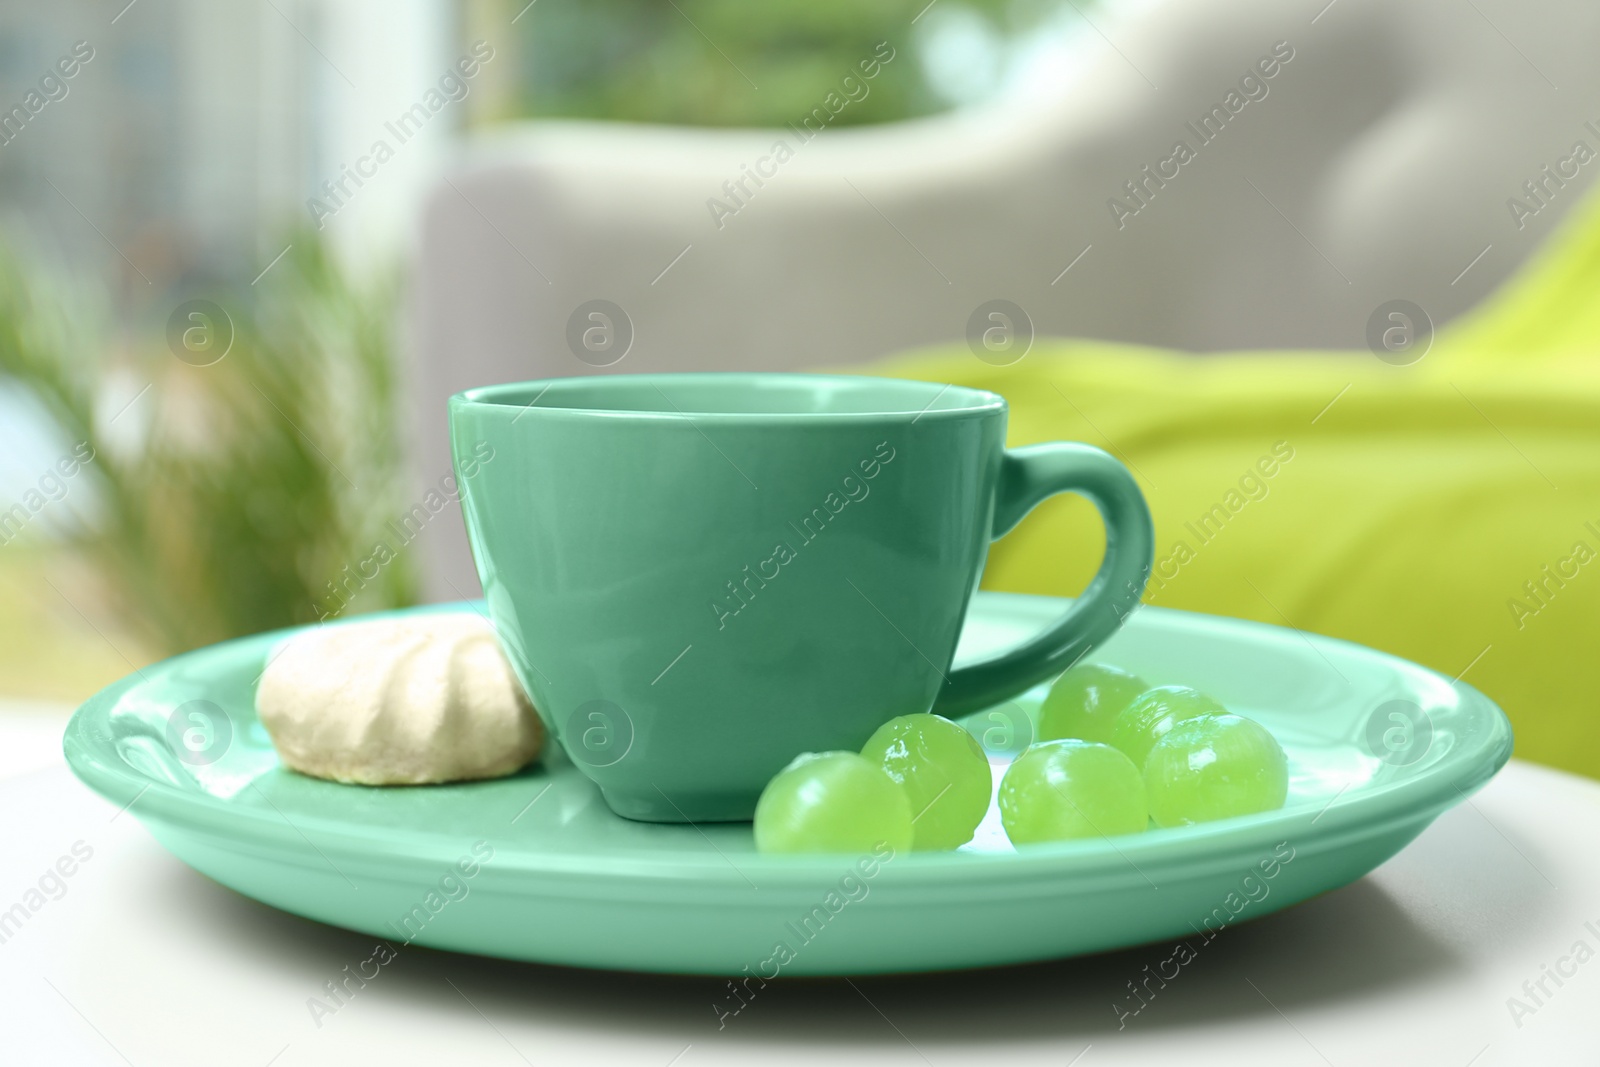 Photo of Green cup and plate with mint candies on table against blurred background